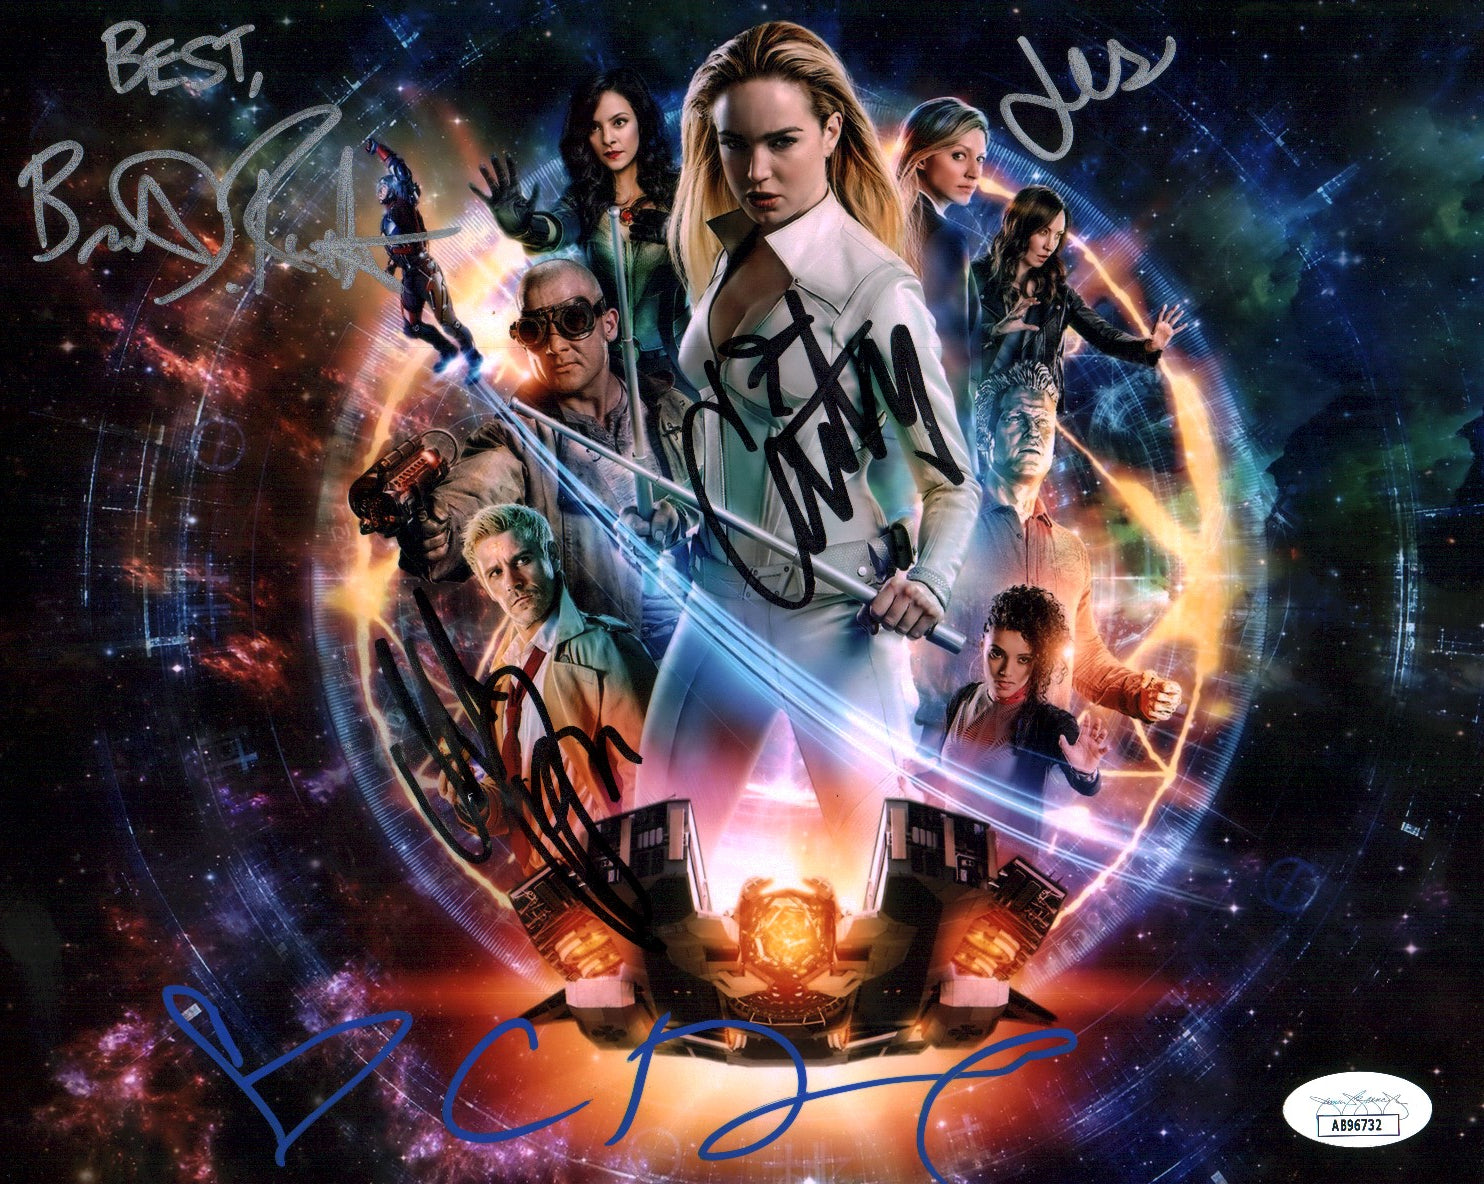 DC Legends of Tomorrow 8x10 Photo Signed Autograph Ford Routh Ryan Macallan Lotz JSA Certified COA Auto GalaxyCon